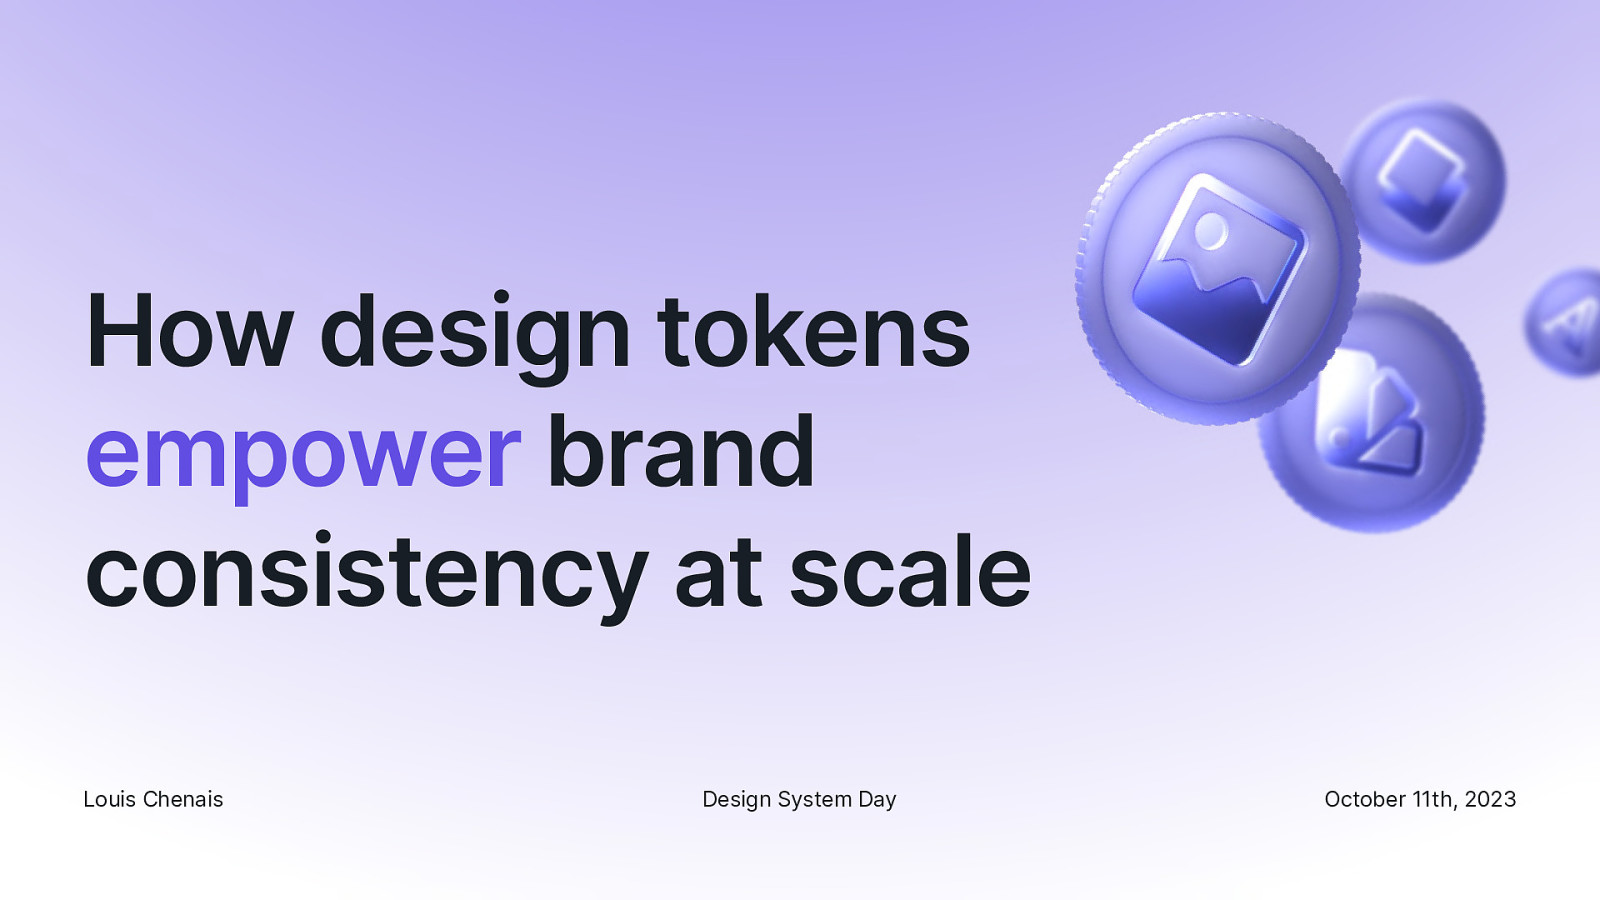 How design tokens empower brand consistency at scale